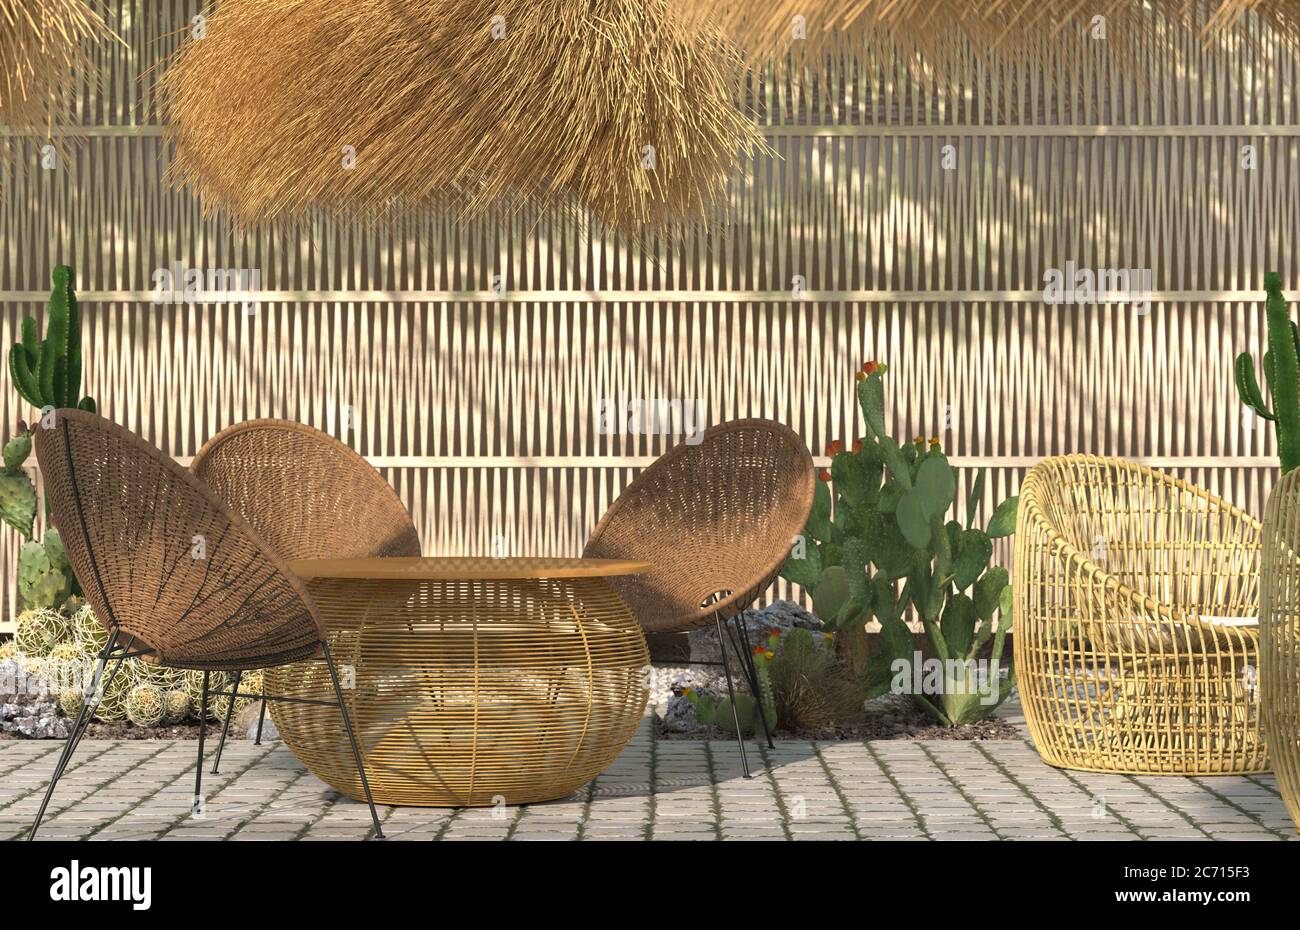 The interior of the open summer terrace of a restaurant or cafe with rattan wicker furniture and thatched lampshades on the background of a decorative Stock Photo